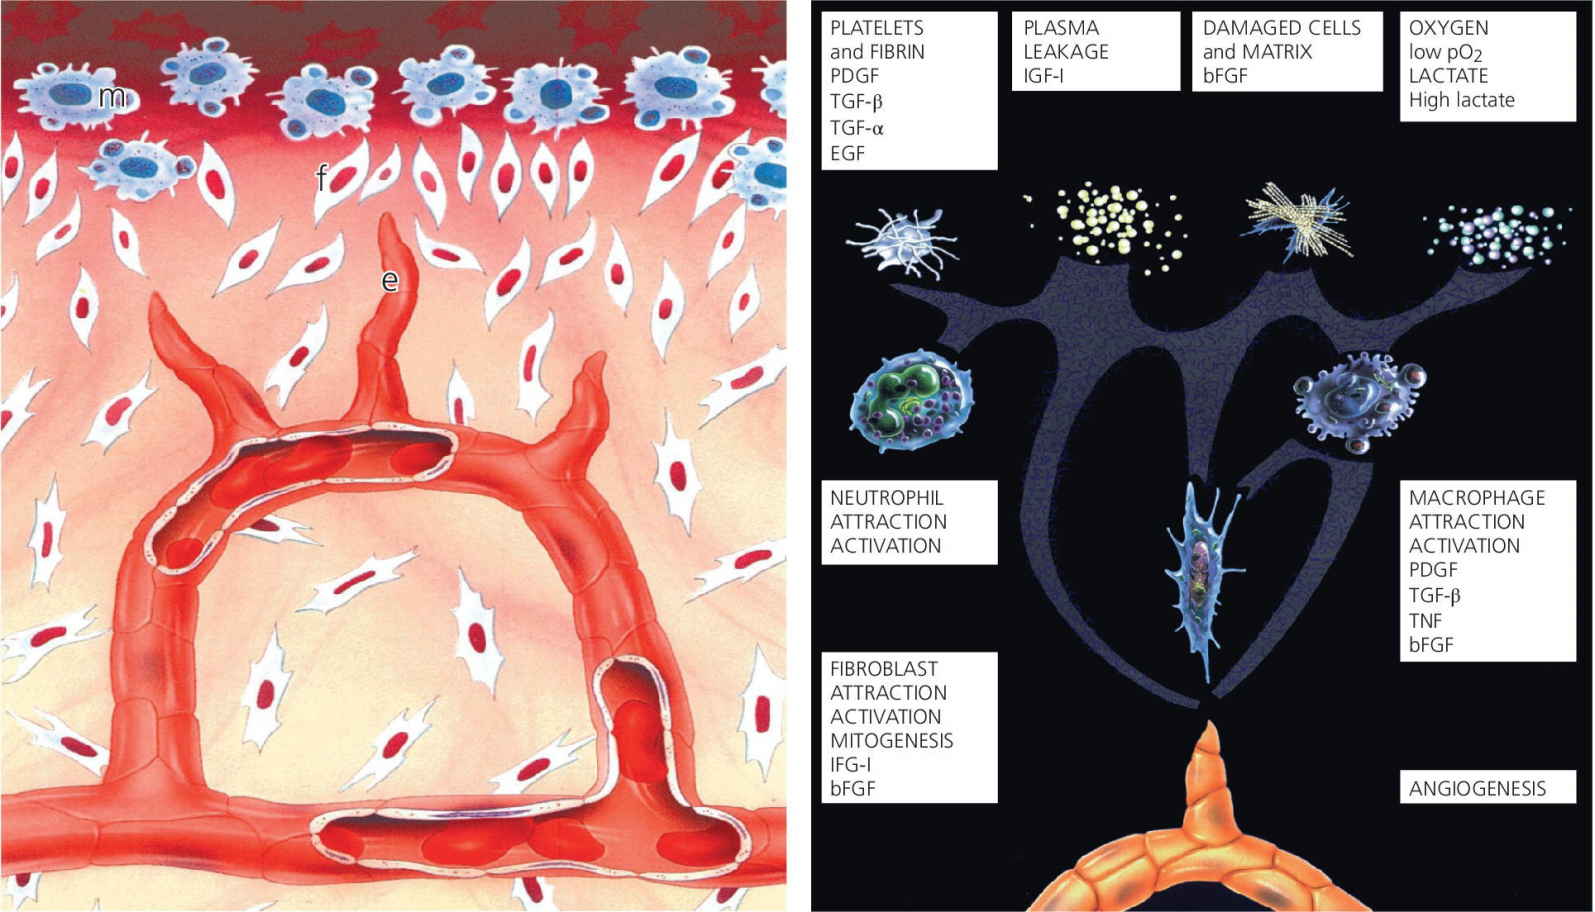 2 Illustrations displaying later wound healing events consisting of macrophages, endothelial cells, fibroblasts (left) and angiogenesis, platelets and fibrin, plasma leakage, etc. (right).